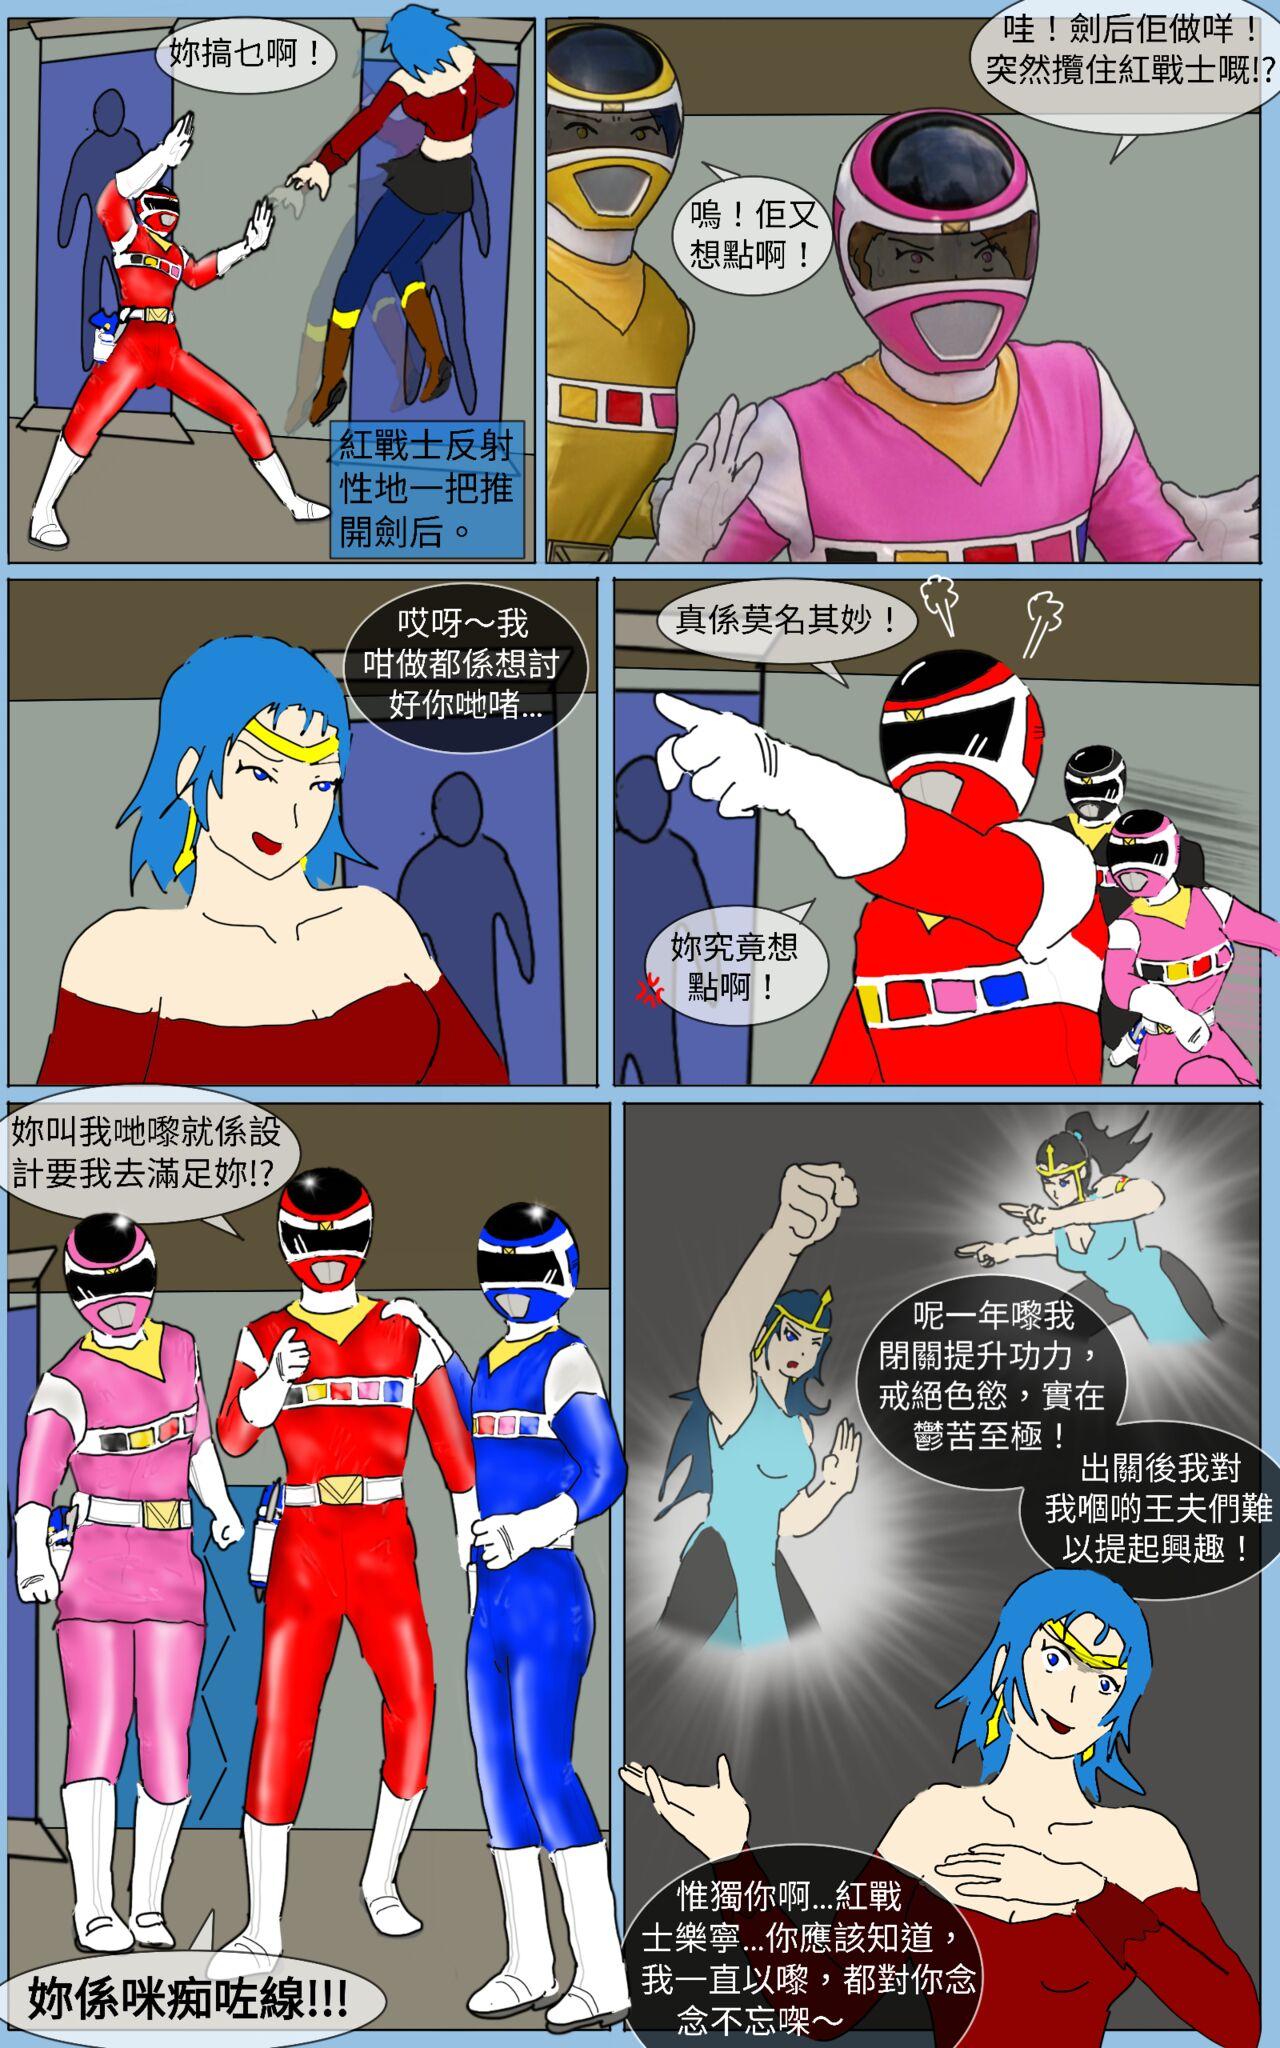 Family Roleplay Mission 32 - Super sentai Mojada - Page 6